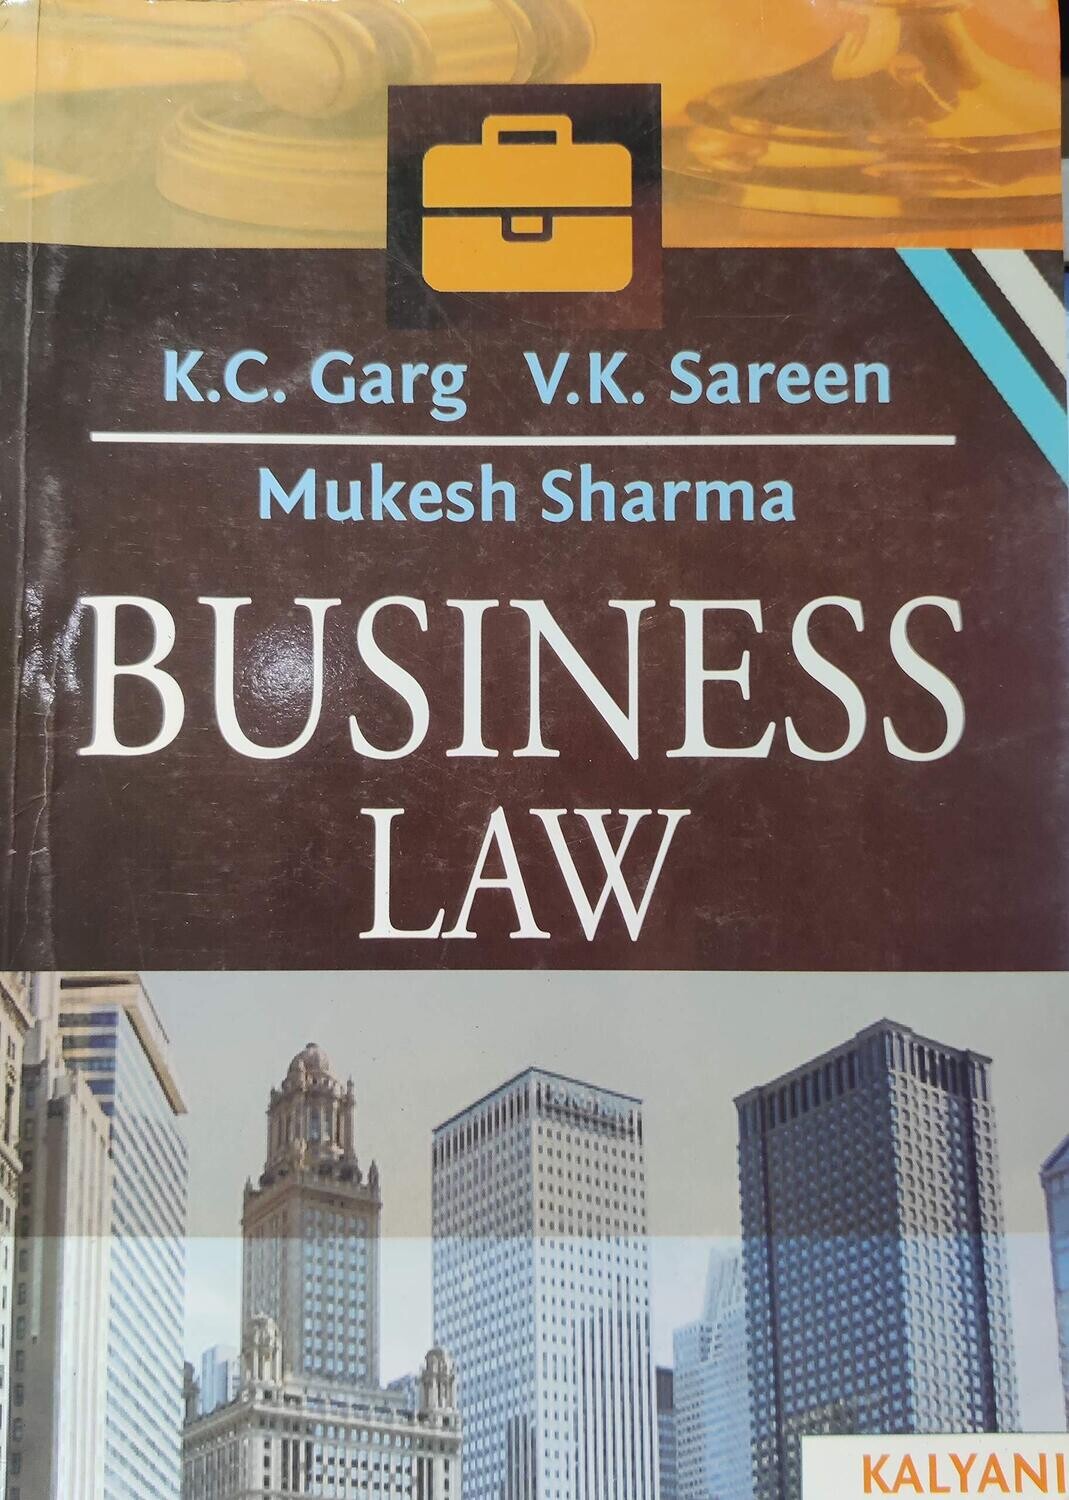 Business Law B.Com (Hons.) 1st and 2nd Sem. MD University by Mukesh Sharma and K.C. Garg and V.K. Sareen